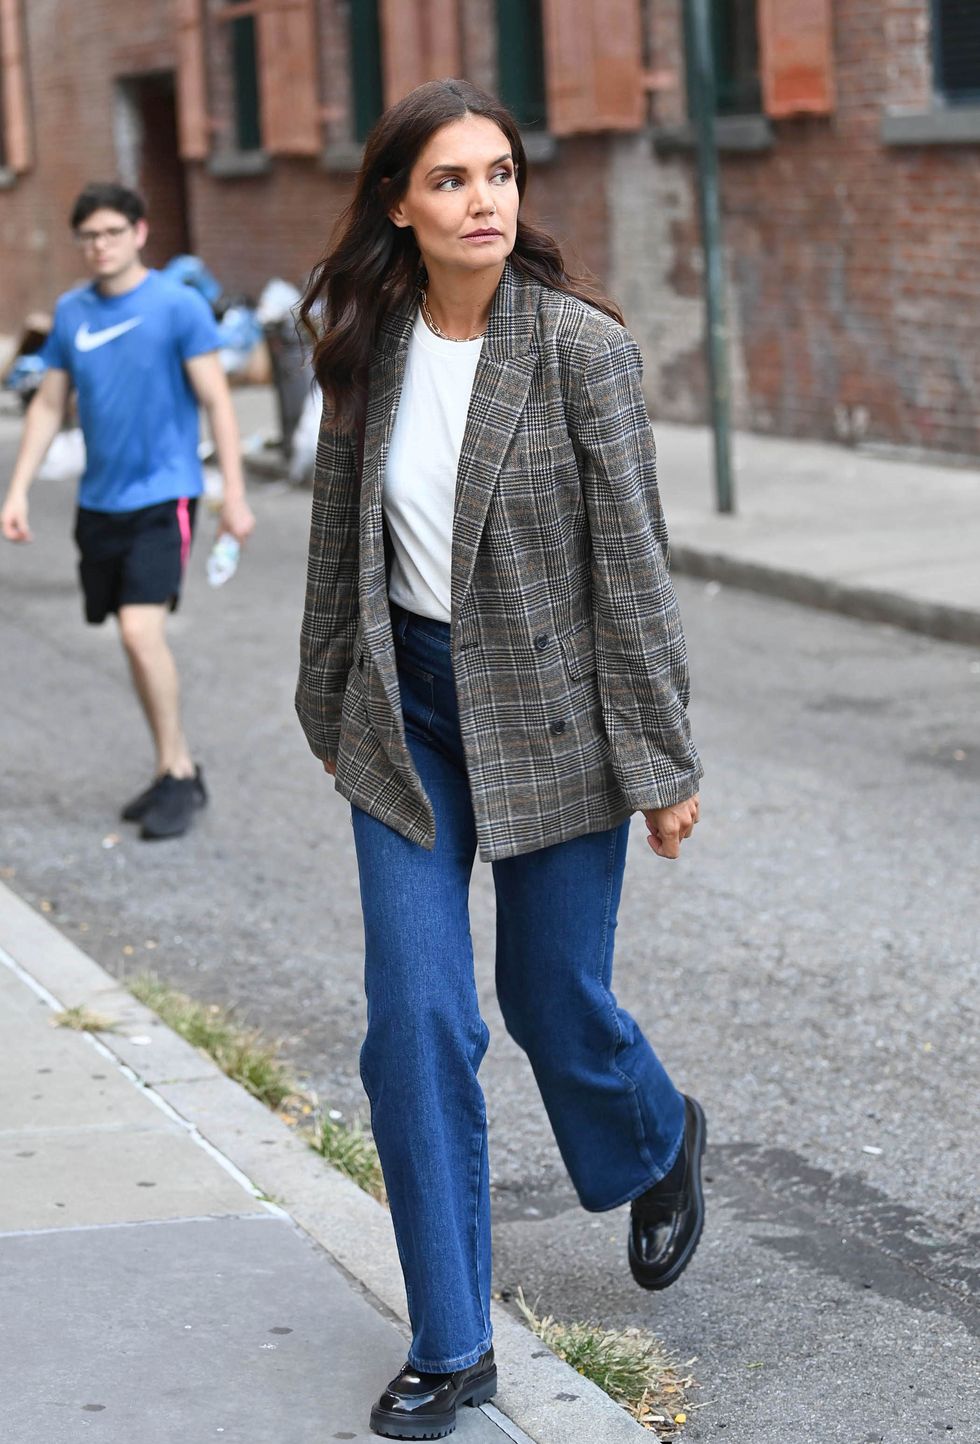 Katie Holmes' Best Street Style From 2004 Through 2021